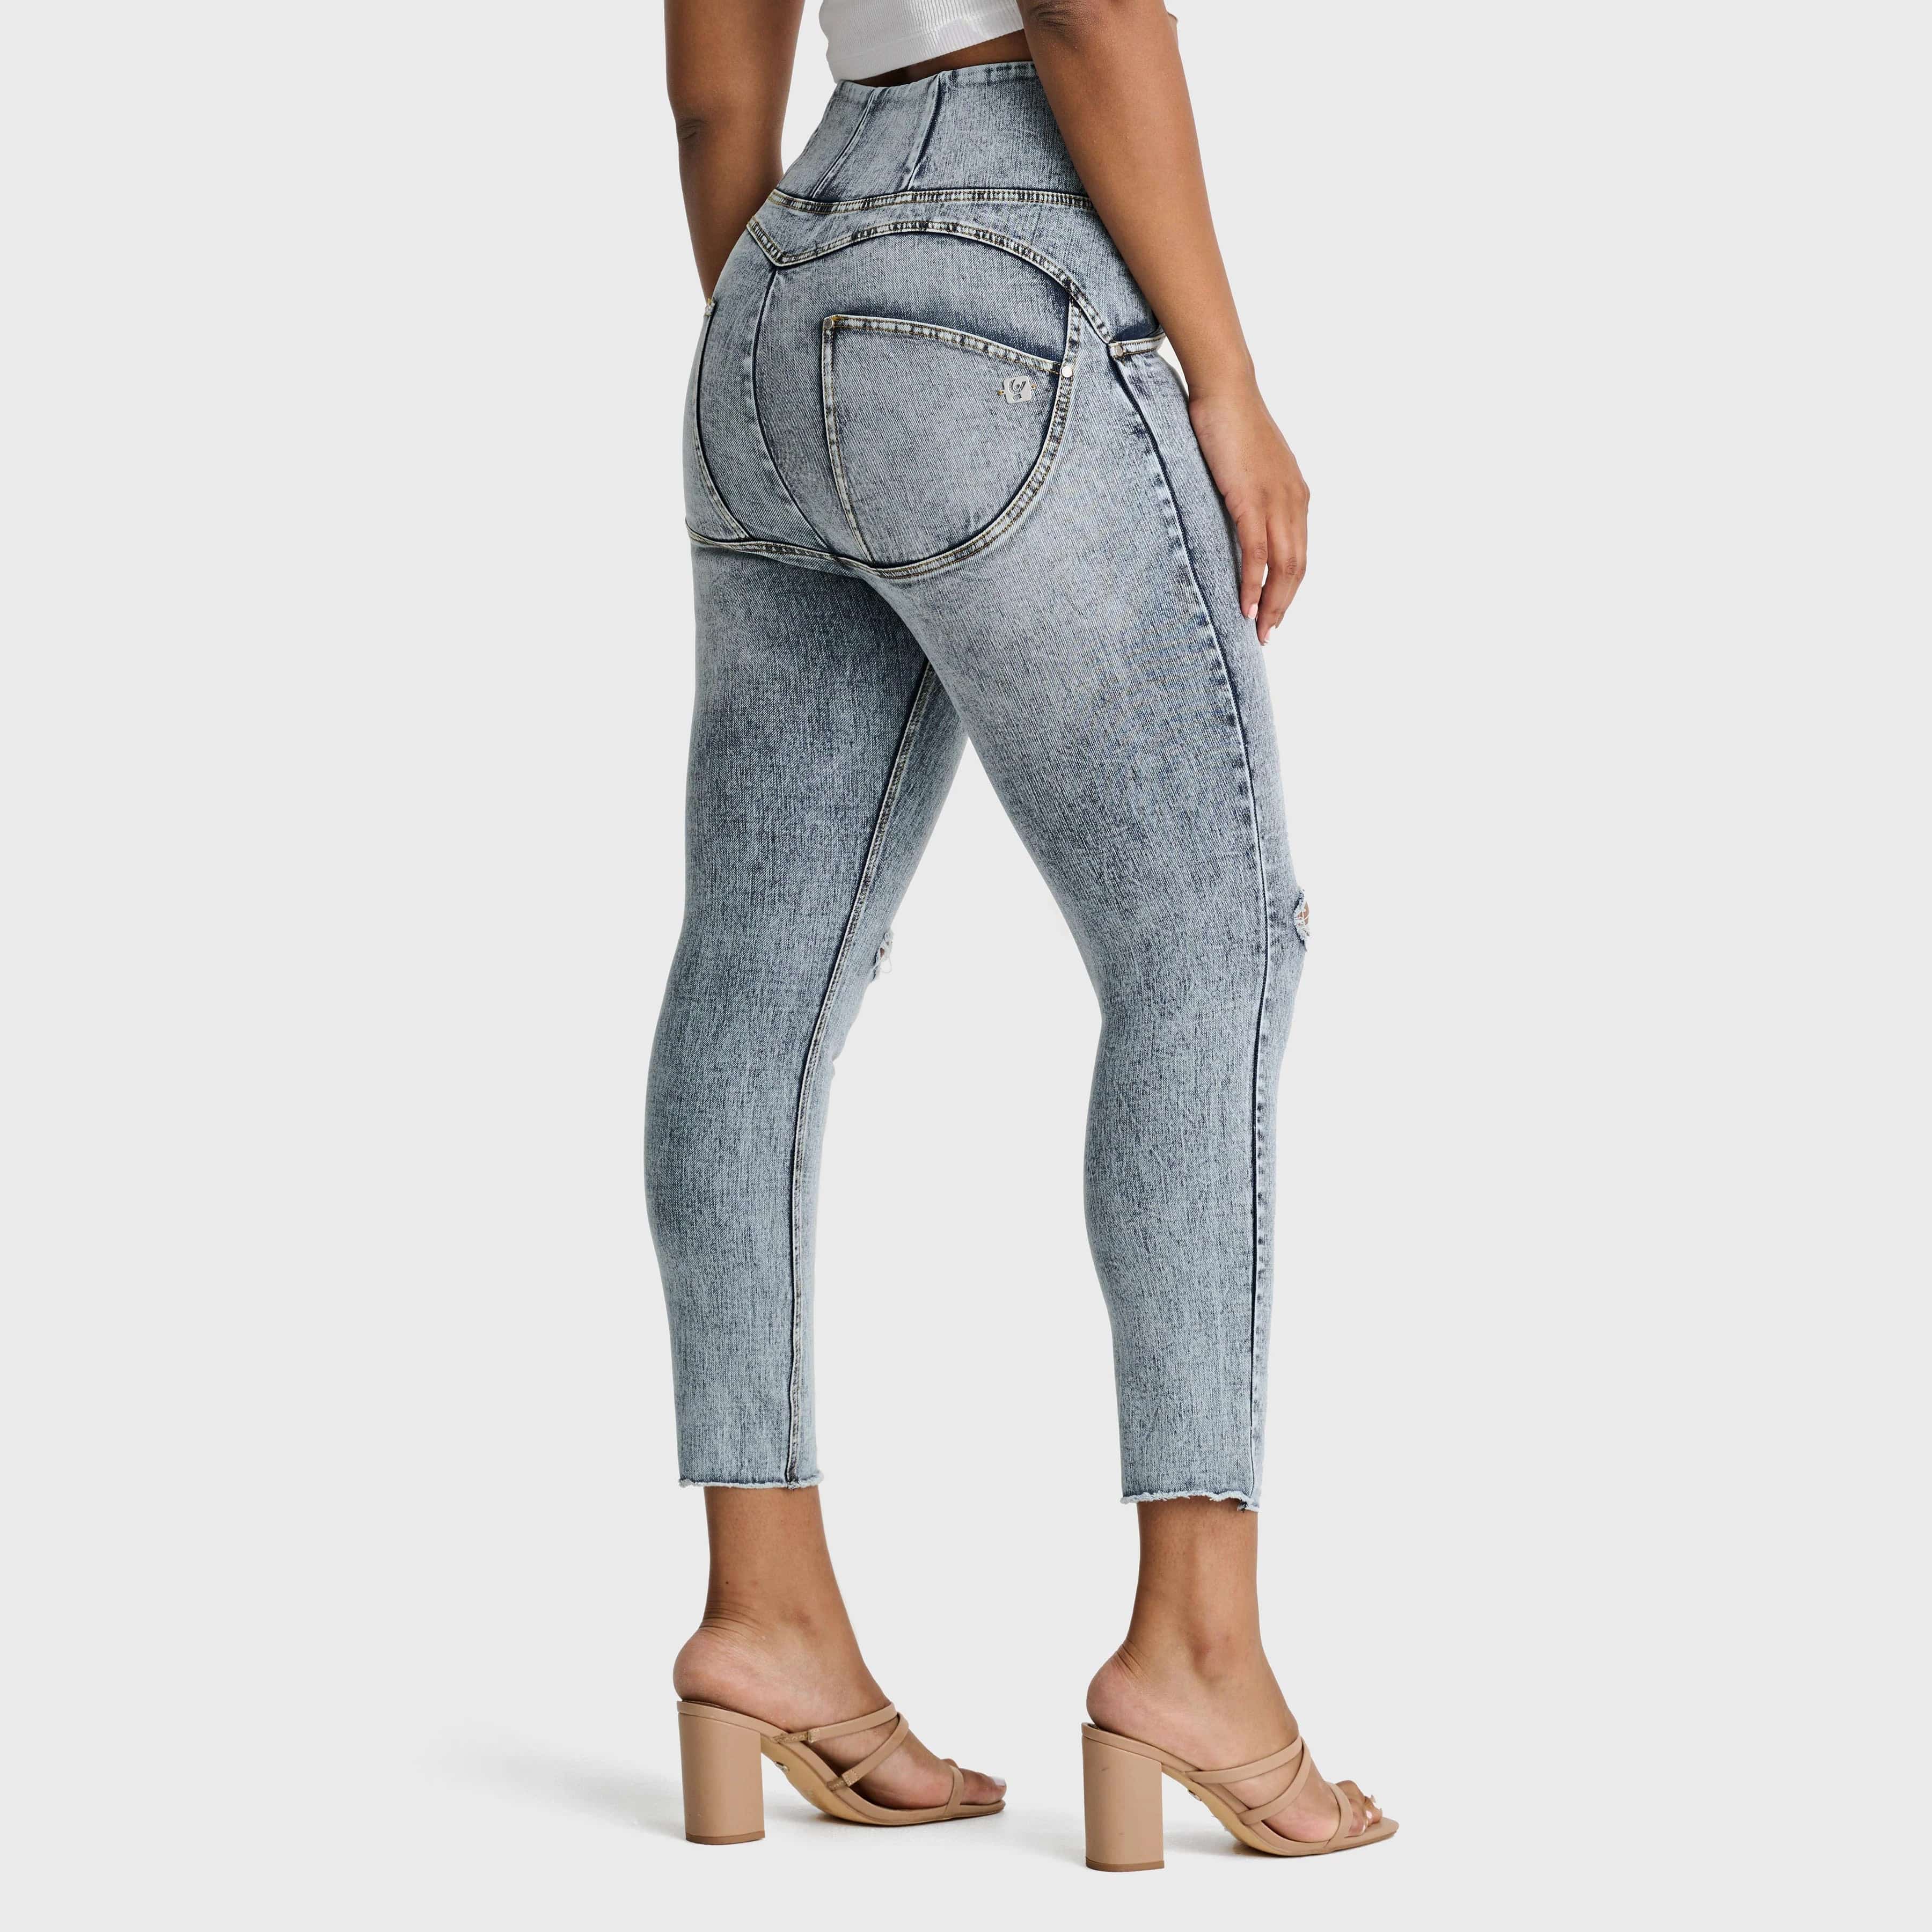 WR.UP® Snug Curvy Ripped Jeans - High Waisted - Petite Length - Blue Stonewash + Yellow Stitching 3